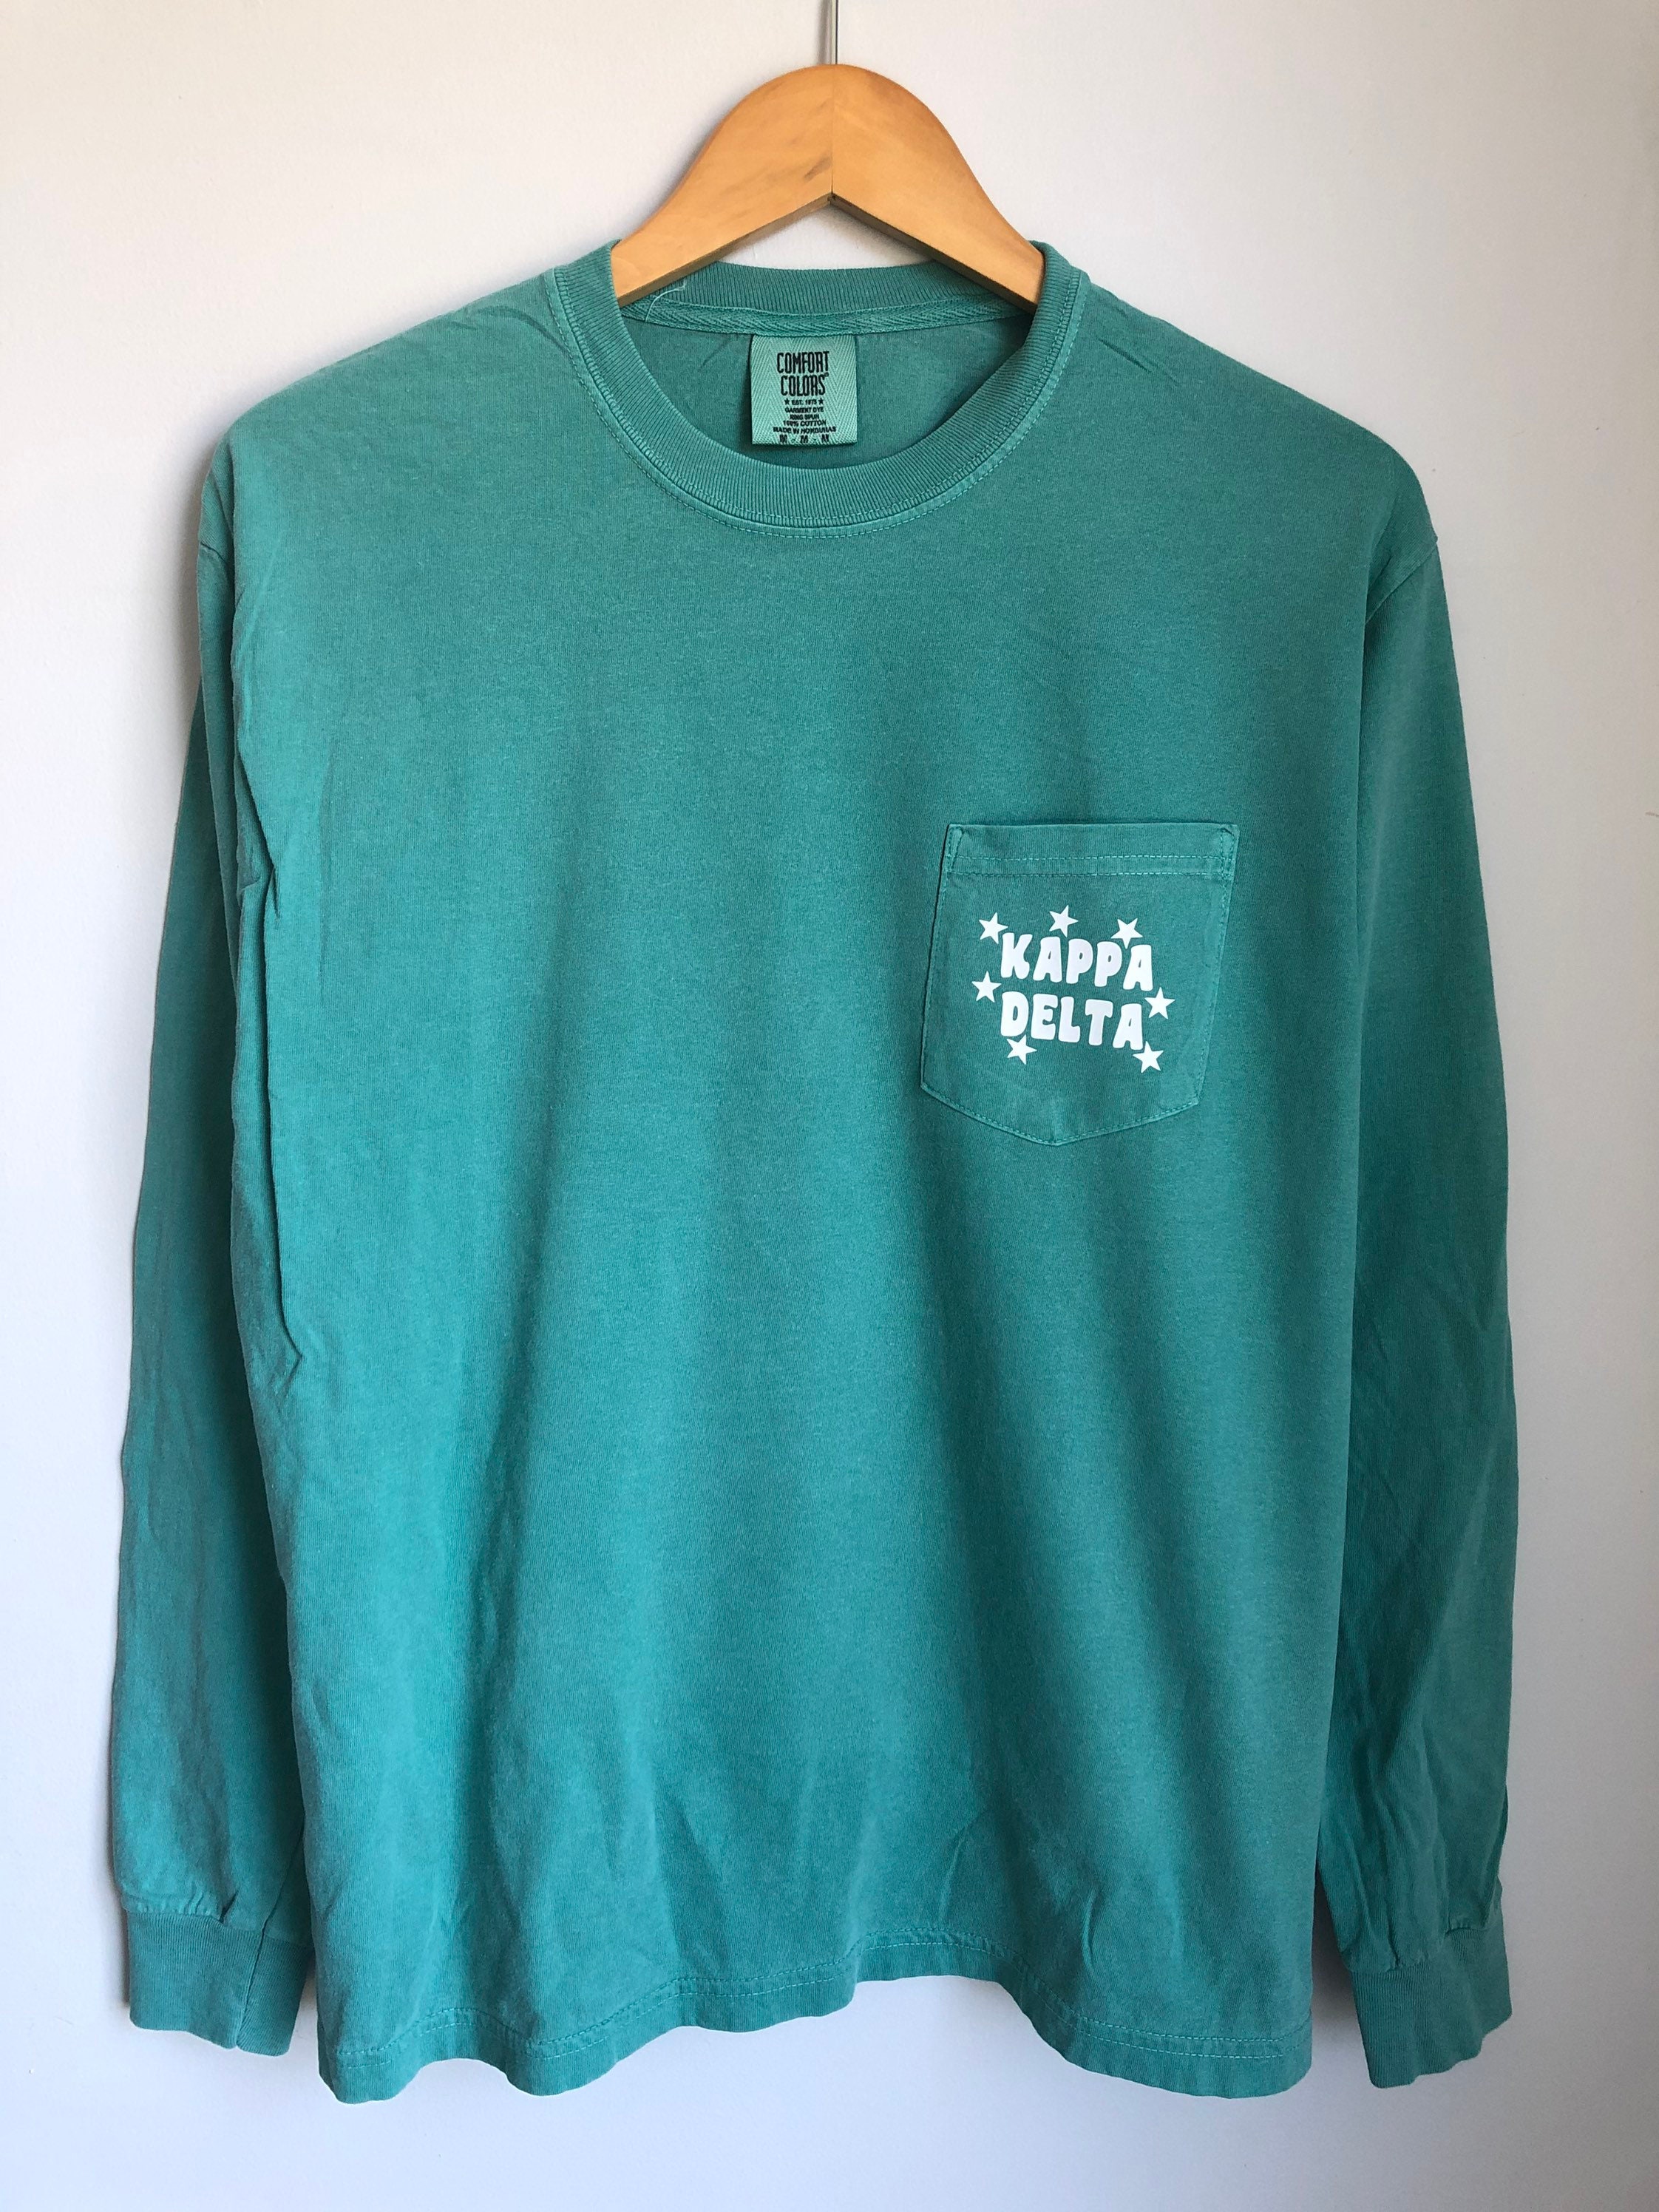 Seafoam Comfort Color Long Sleeve Pocket TShirt with Star | Etsy